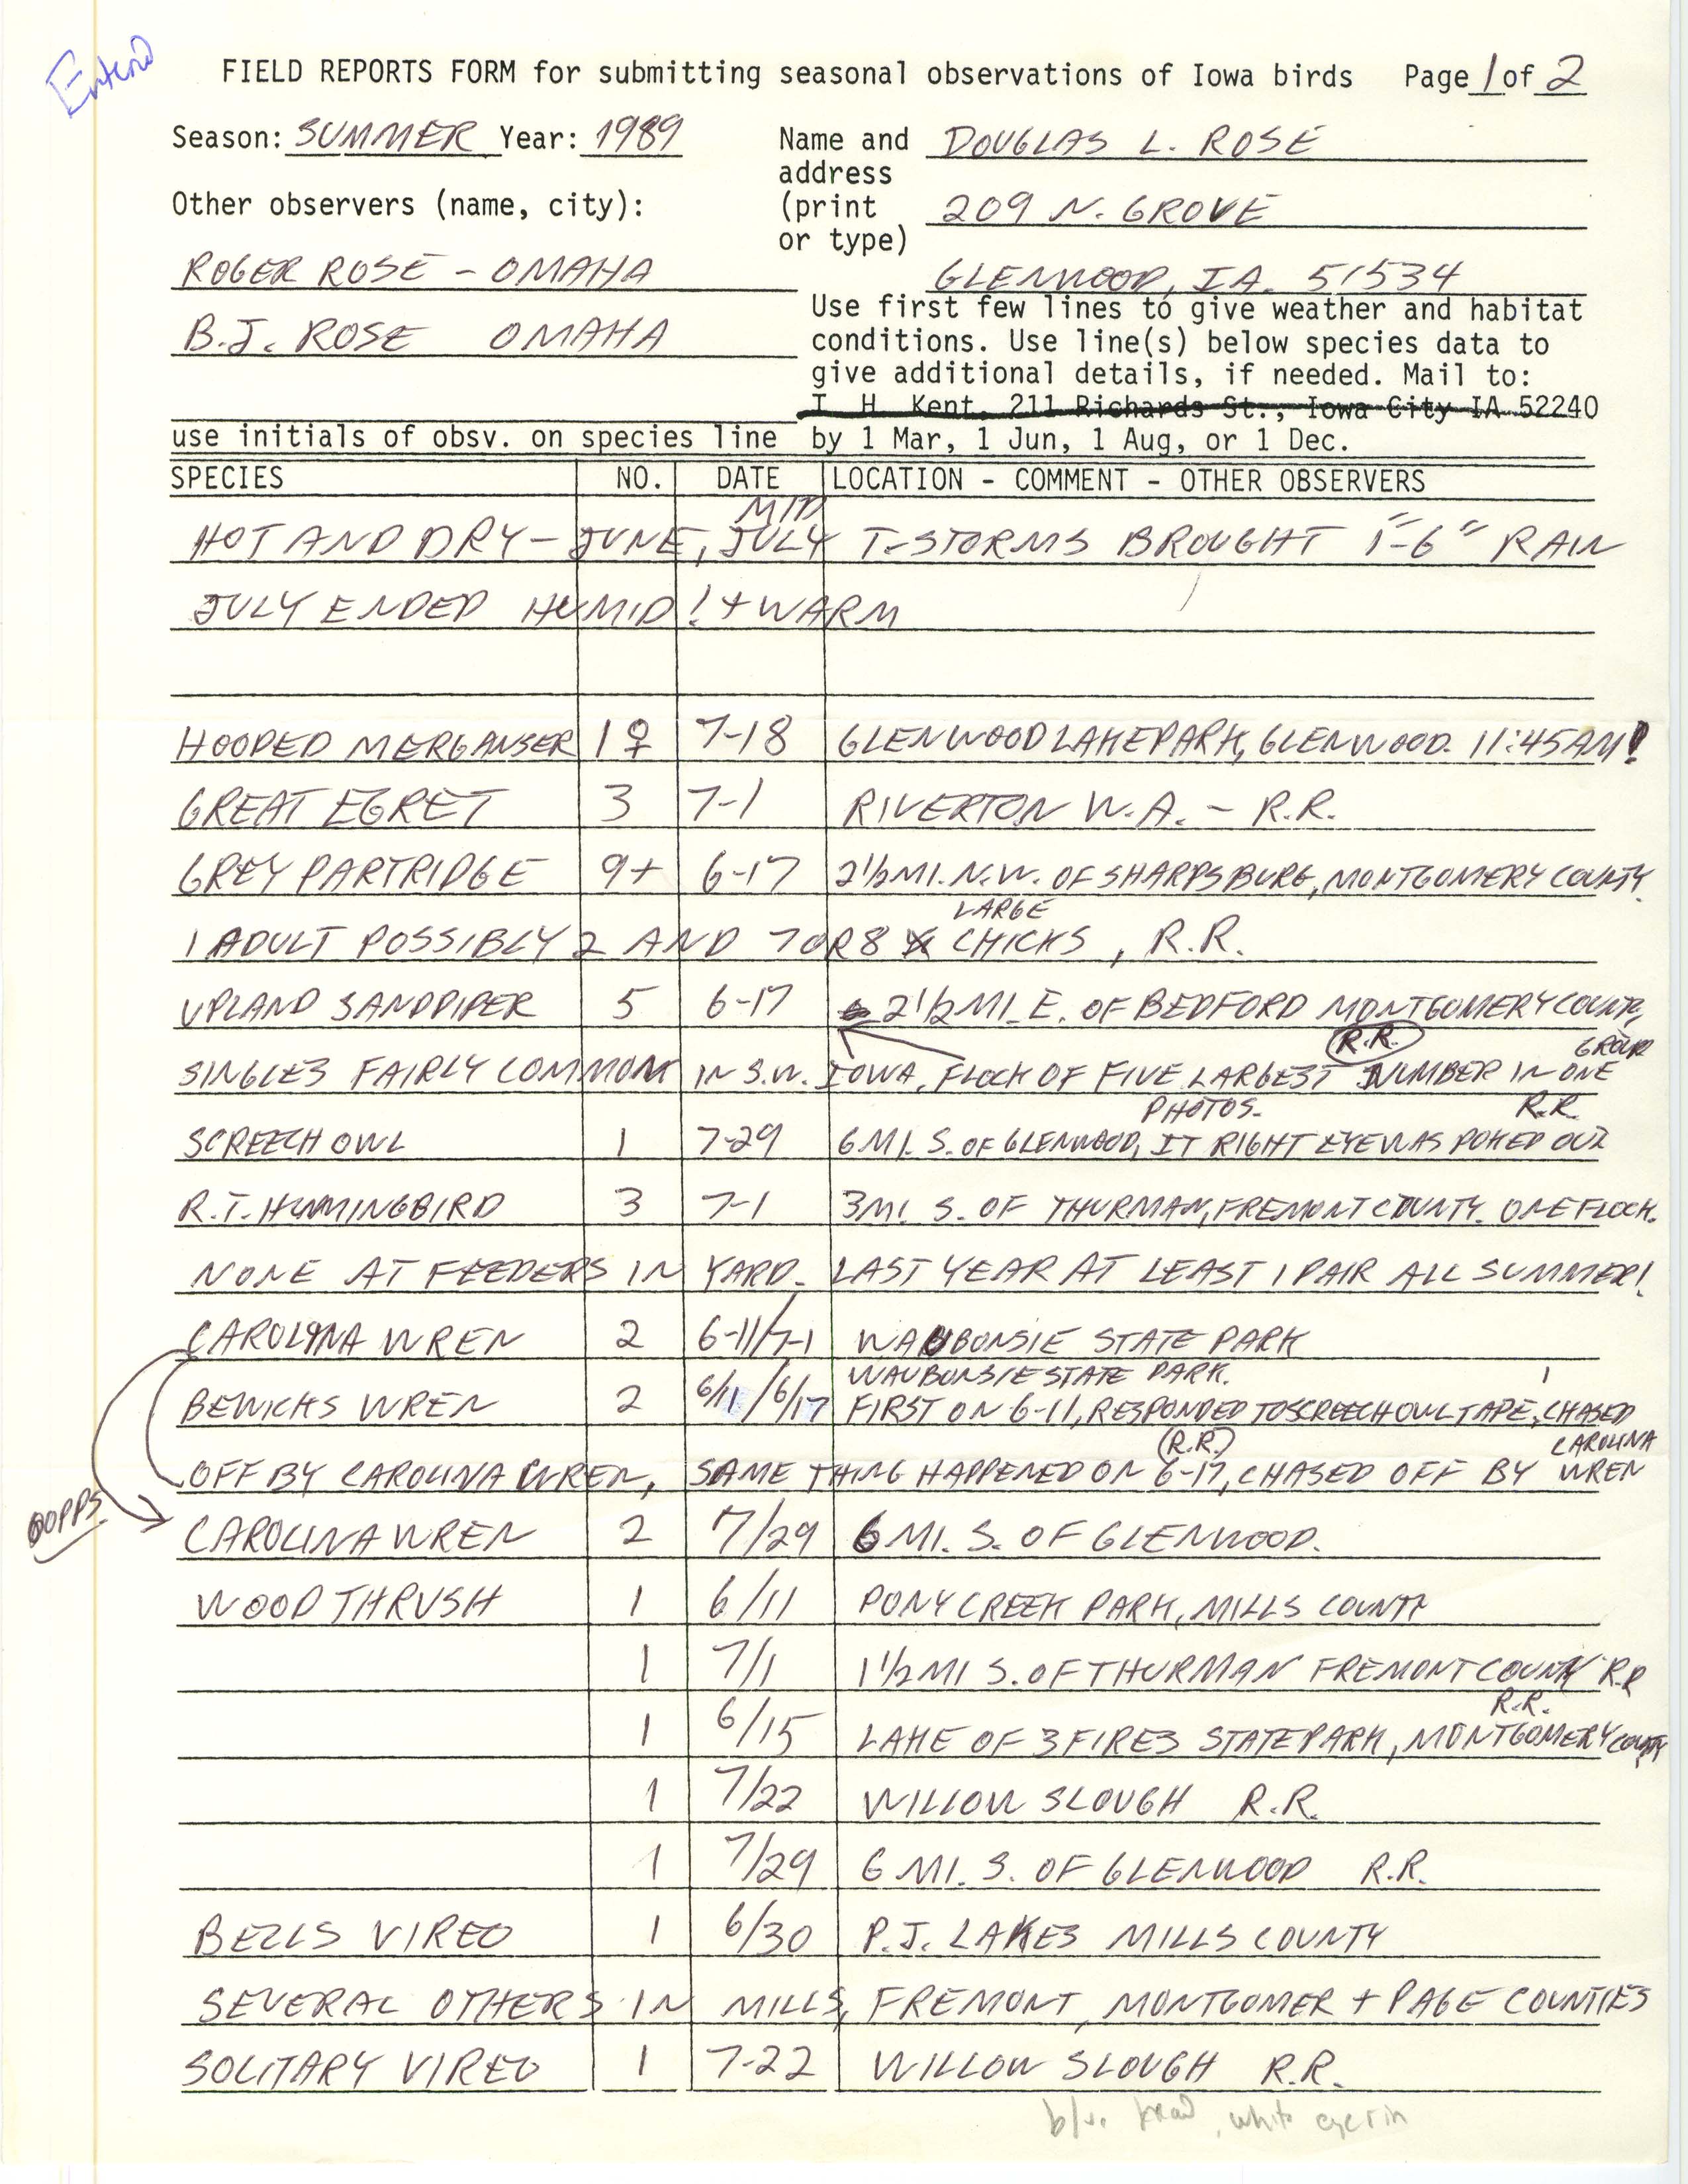 Field reports form for submitting seasonal observations of Iowa birds, Douglas Rose, summer 1989